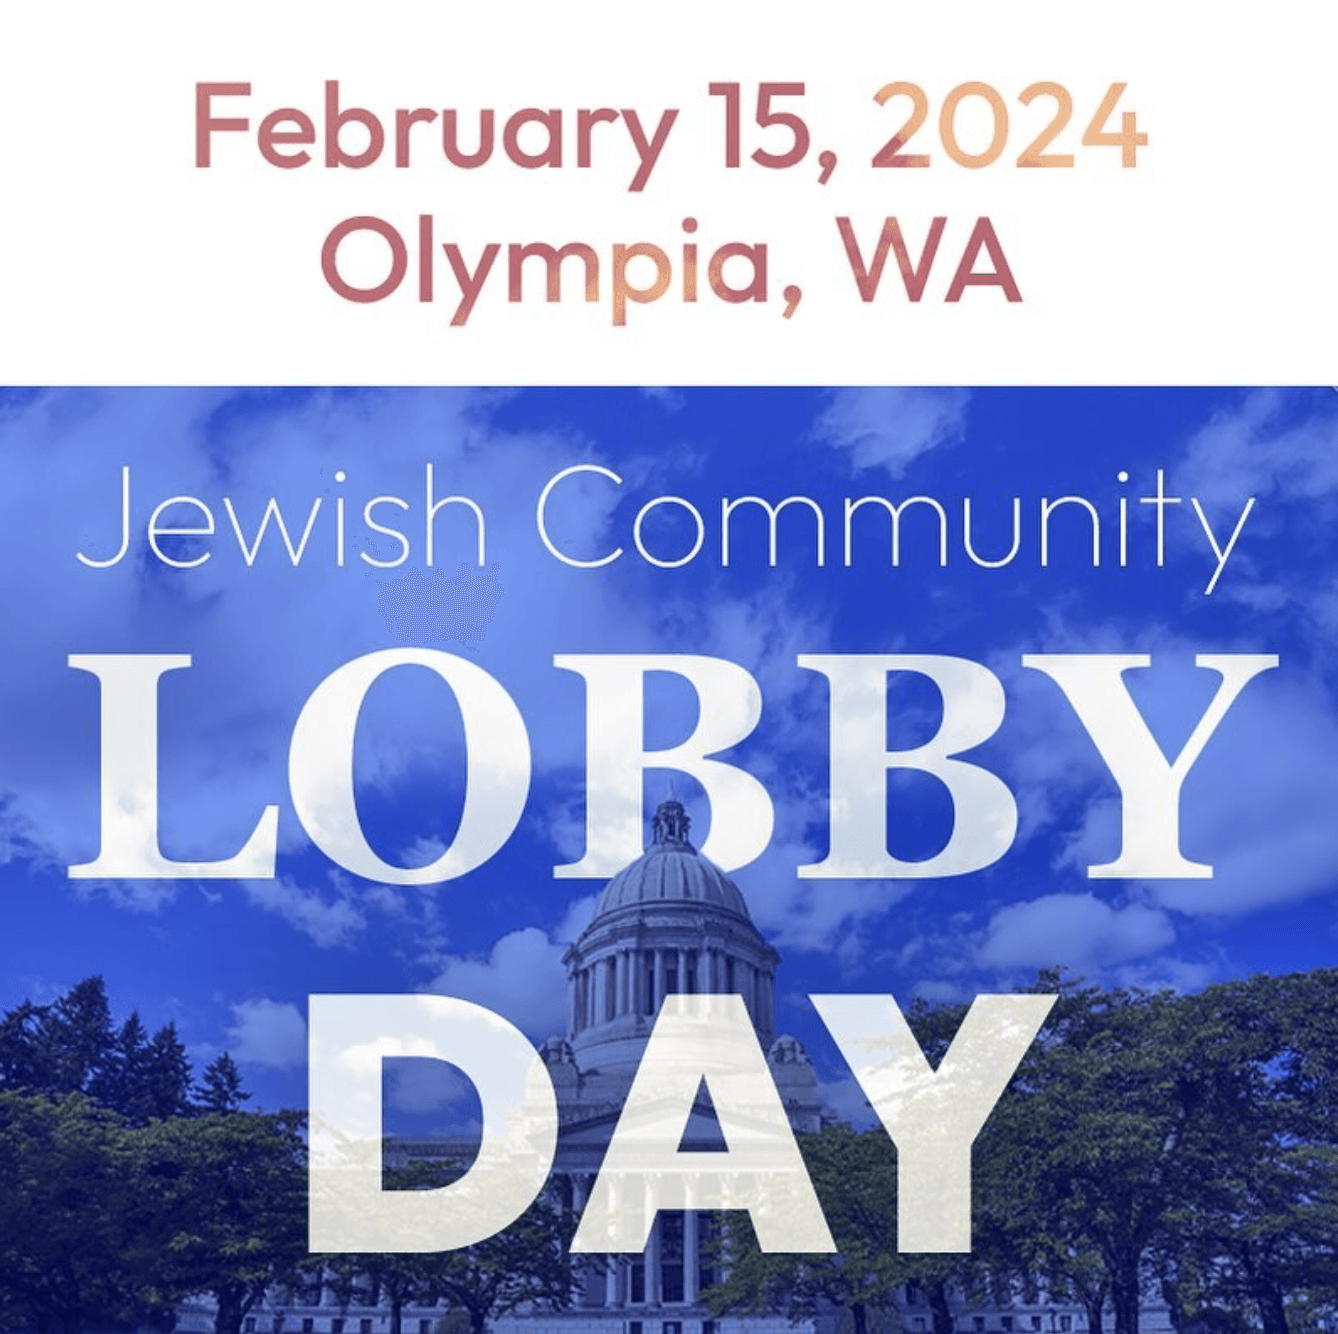 February 15, 2024 | Jewish Community Lobby Day. Square graphic showing a blue-hued photo of the WA State Capitol Building. Text overlayed in white capital letters.